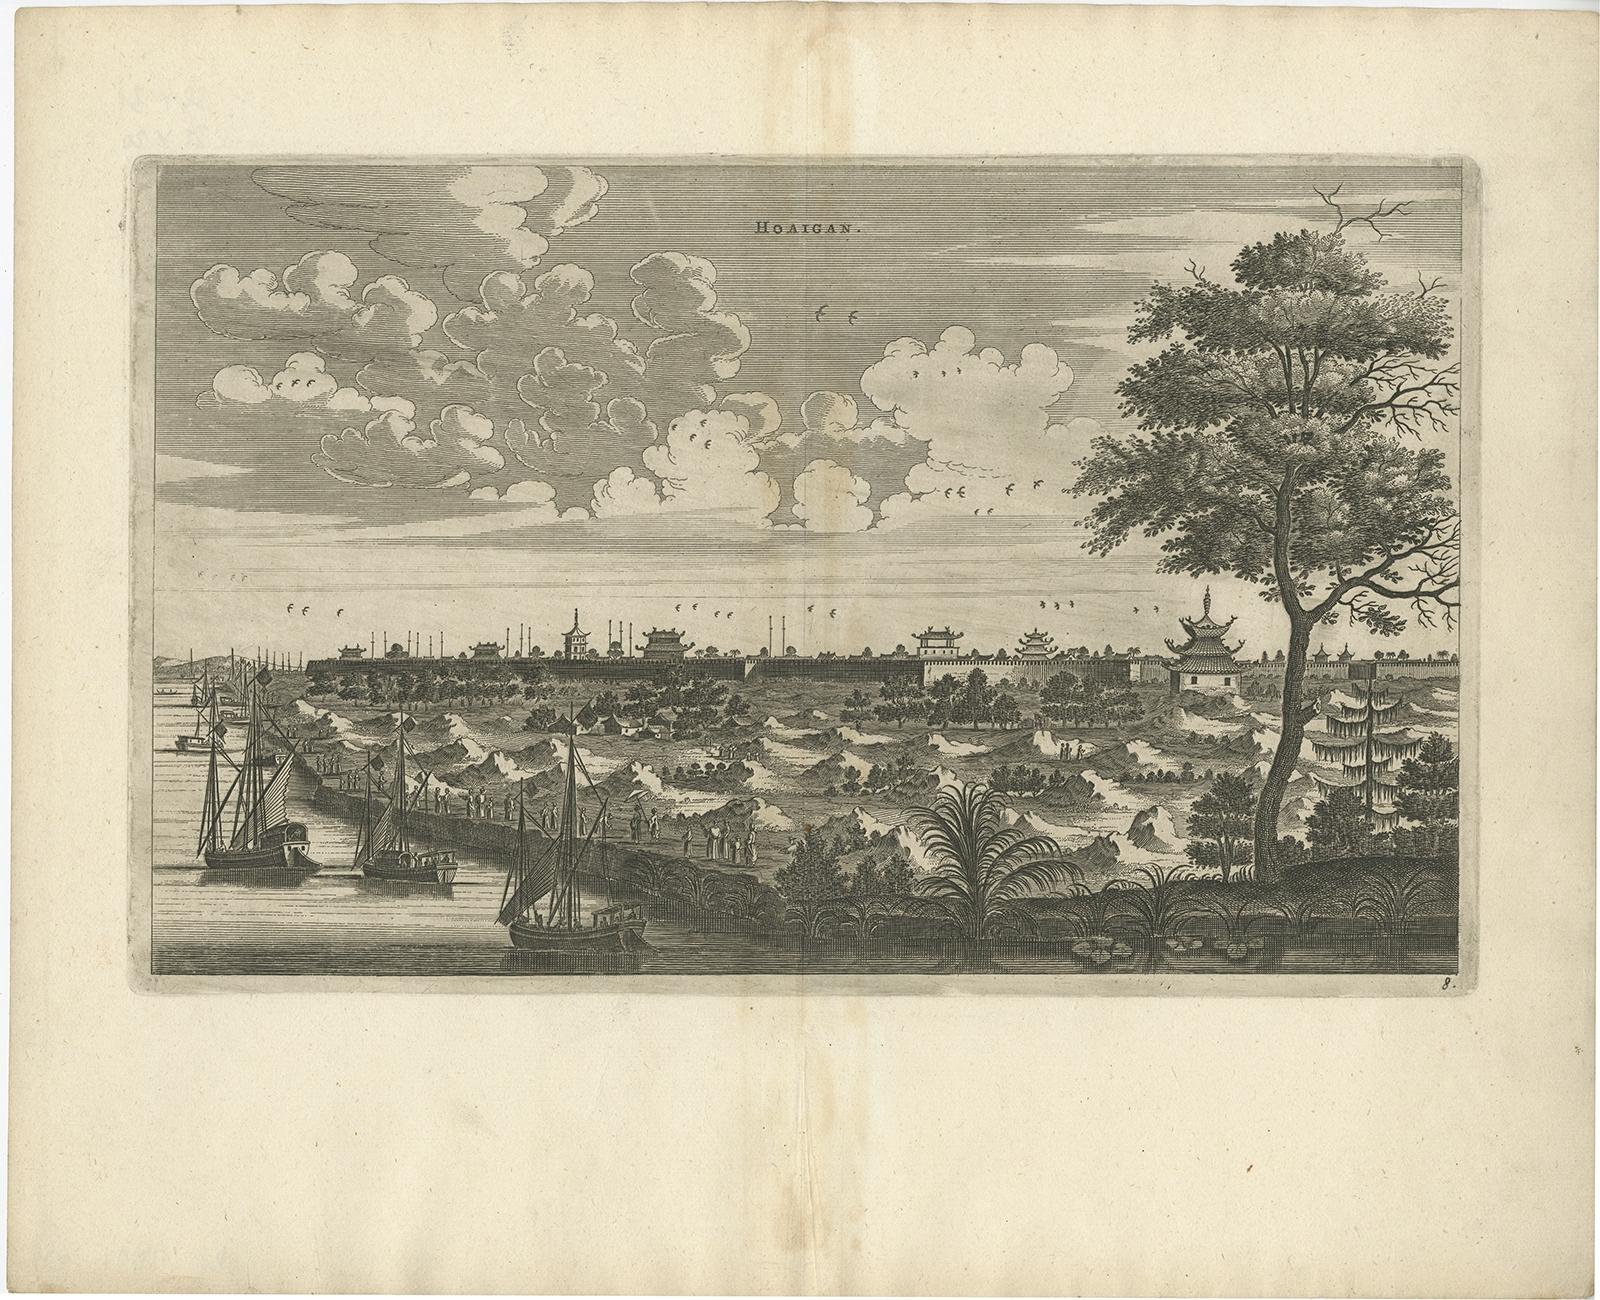 Antique print China titled 'Hoaigan'. Old print depicting a view on the Chinese city of Hoaigan with its ramparts. This print originates from the Latin edition of Nieuhof's work titled 'Legatio batavica ad magnum Tartariæ chamum Sungteium